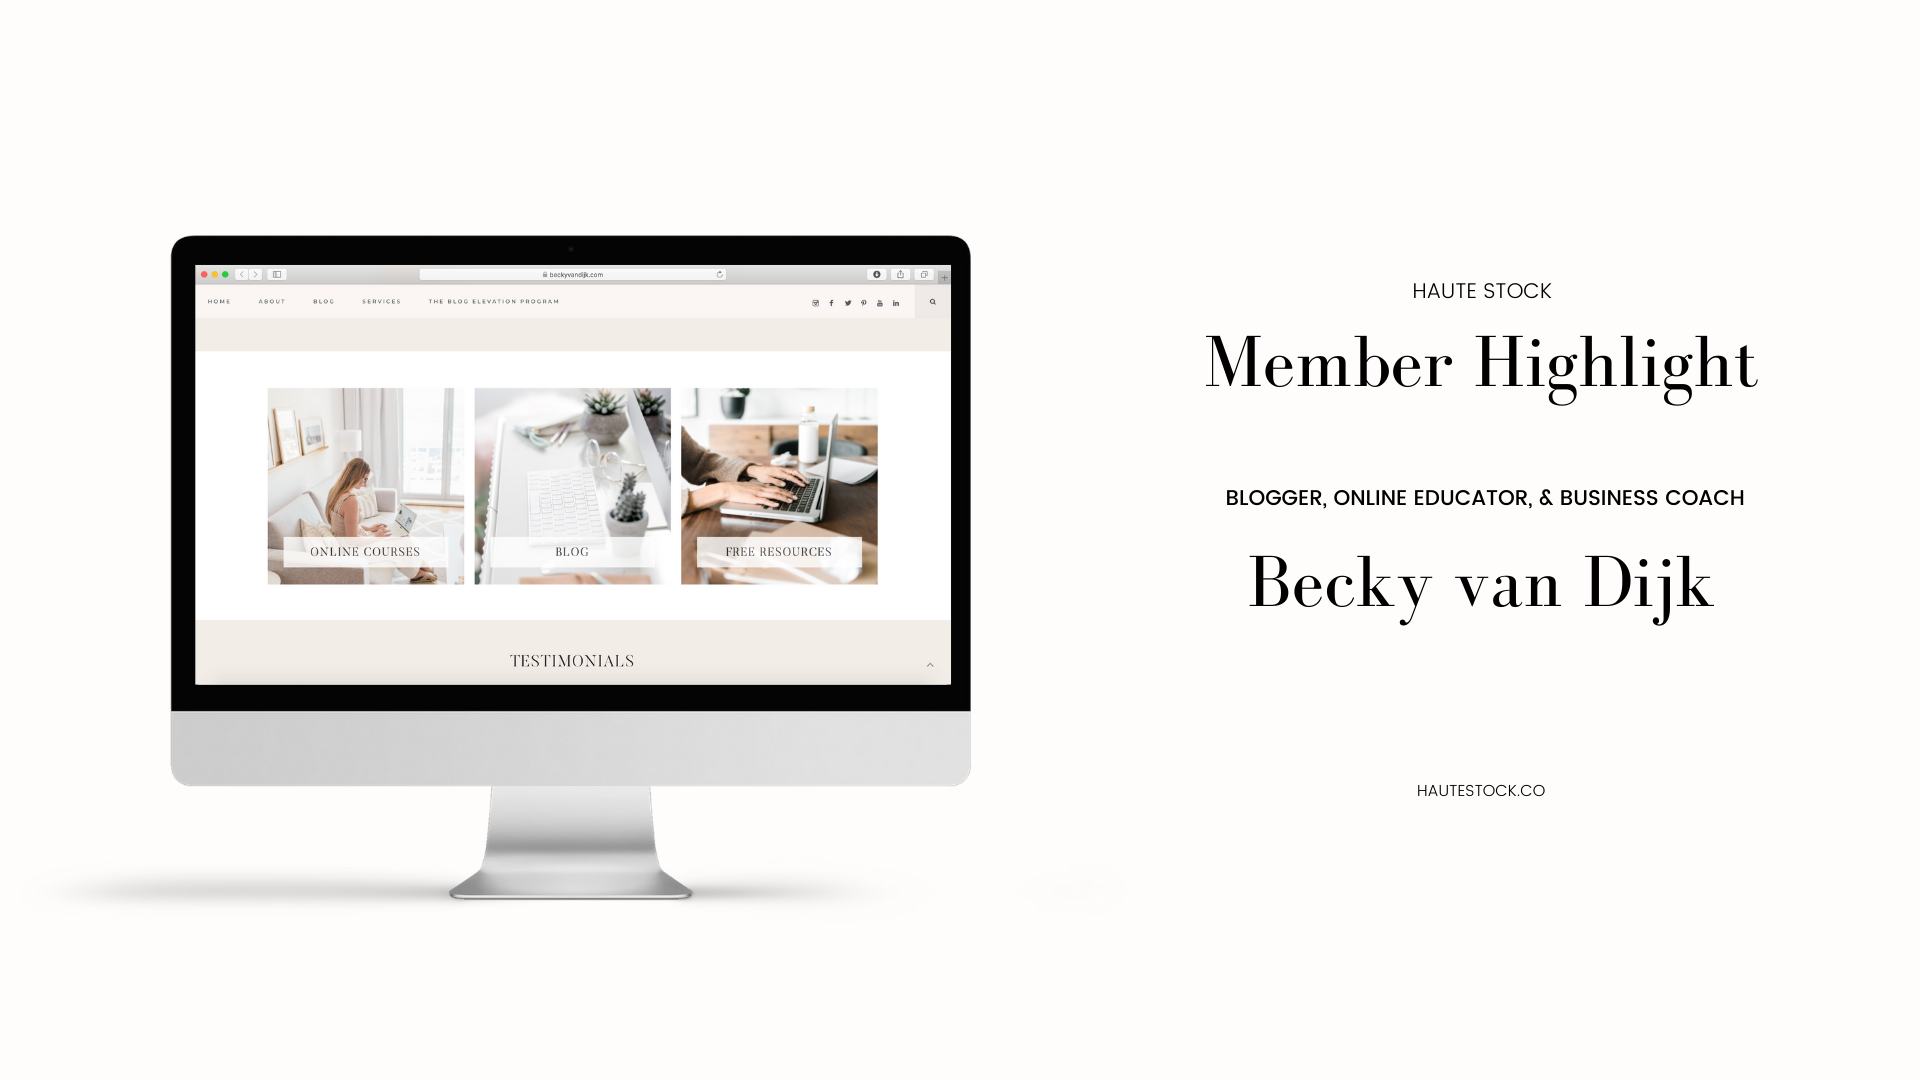 Meet Becky van Dijk, an online educator, blogger, and business coach of several businesses. See how she uses Haute Stock imagery throughout her business to create a beautiful and sophisticated brand.